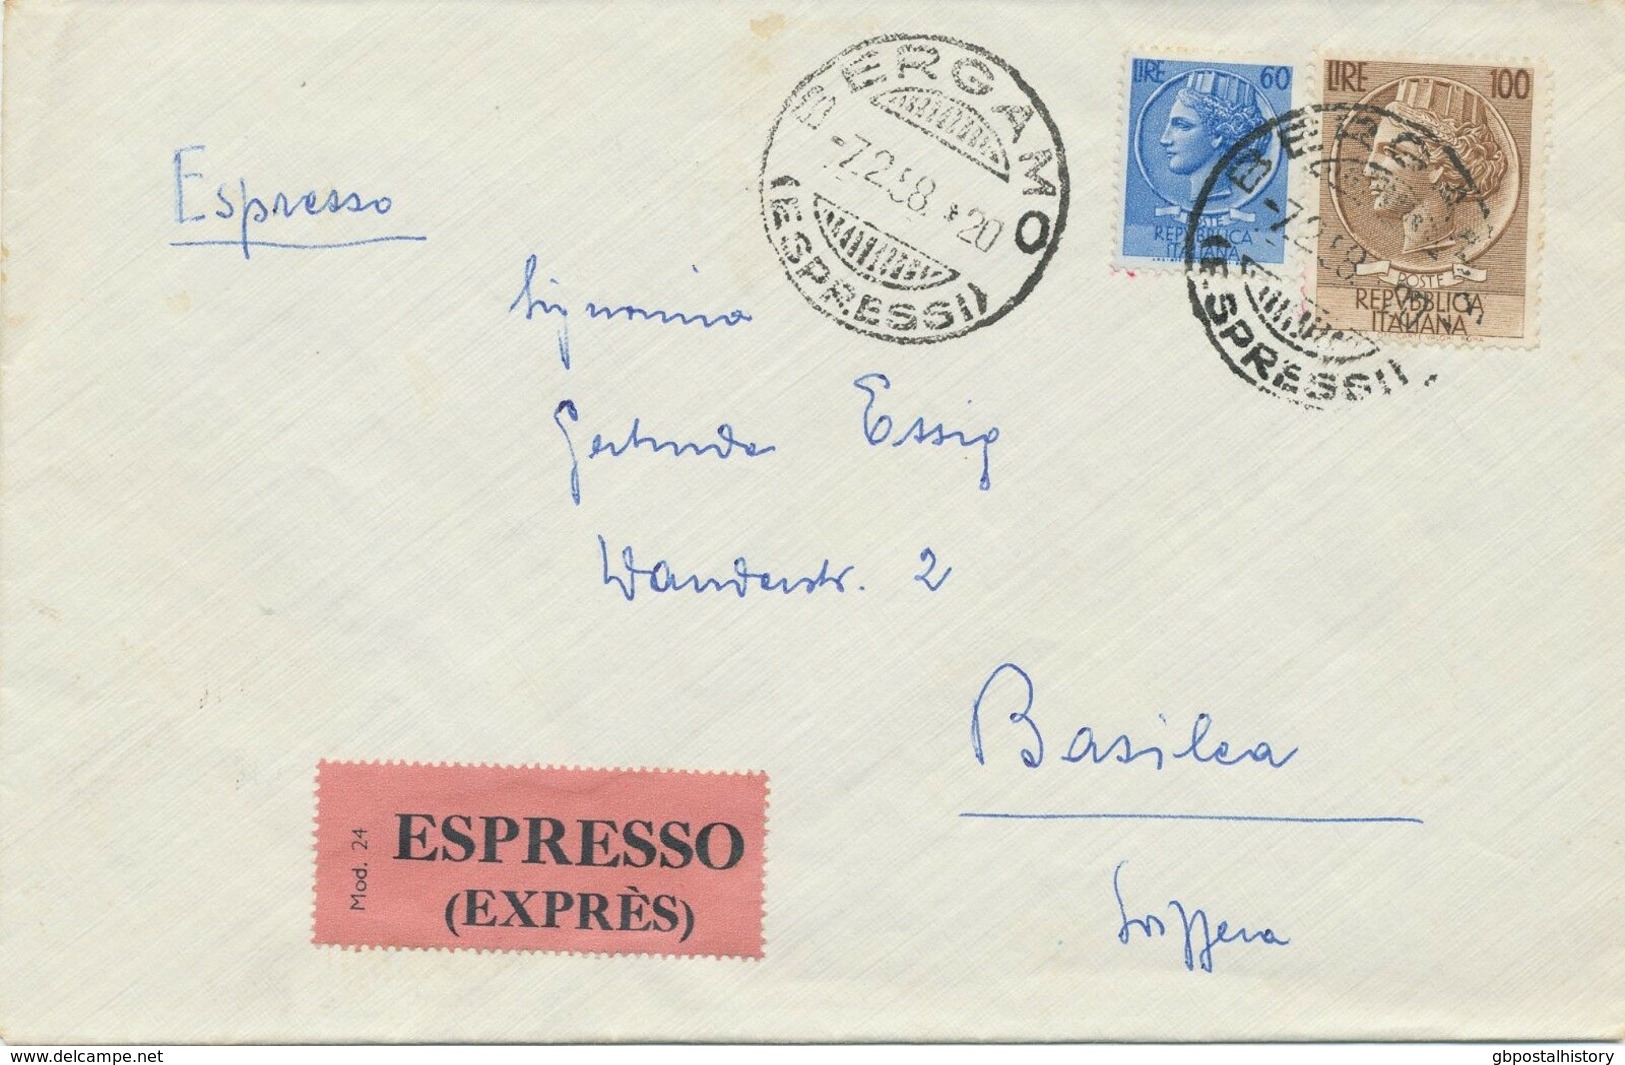 ITALY 1957/77 7 Different Superb ESPRESSO-covers (Express Covers) All Foreign - Express-post/pneumatisch